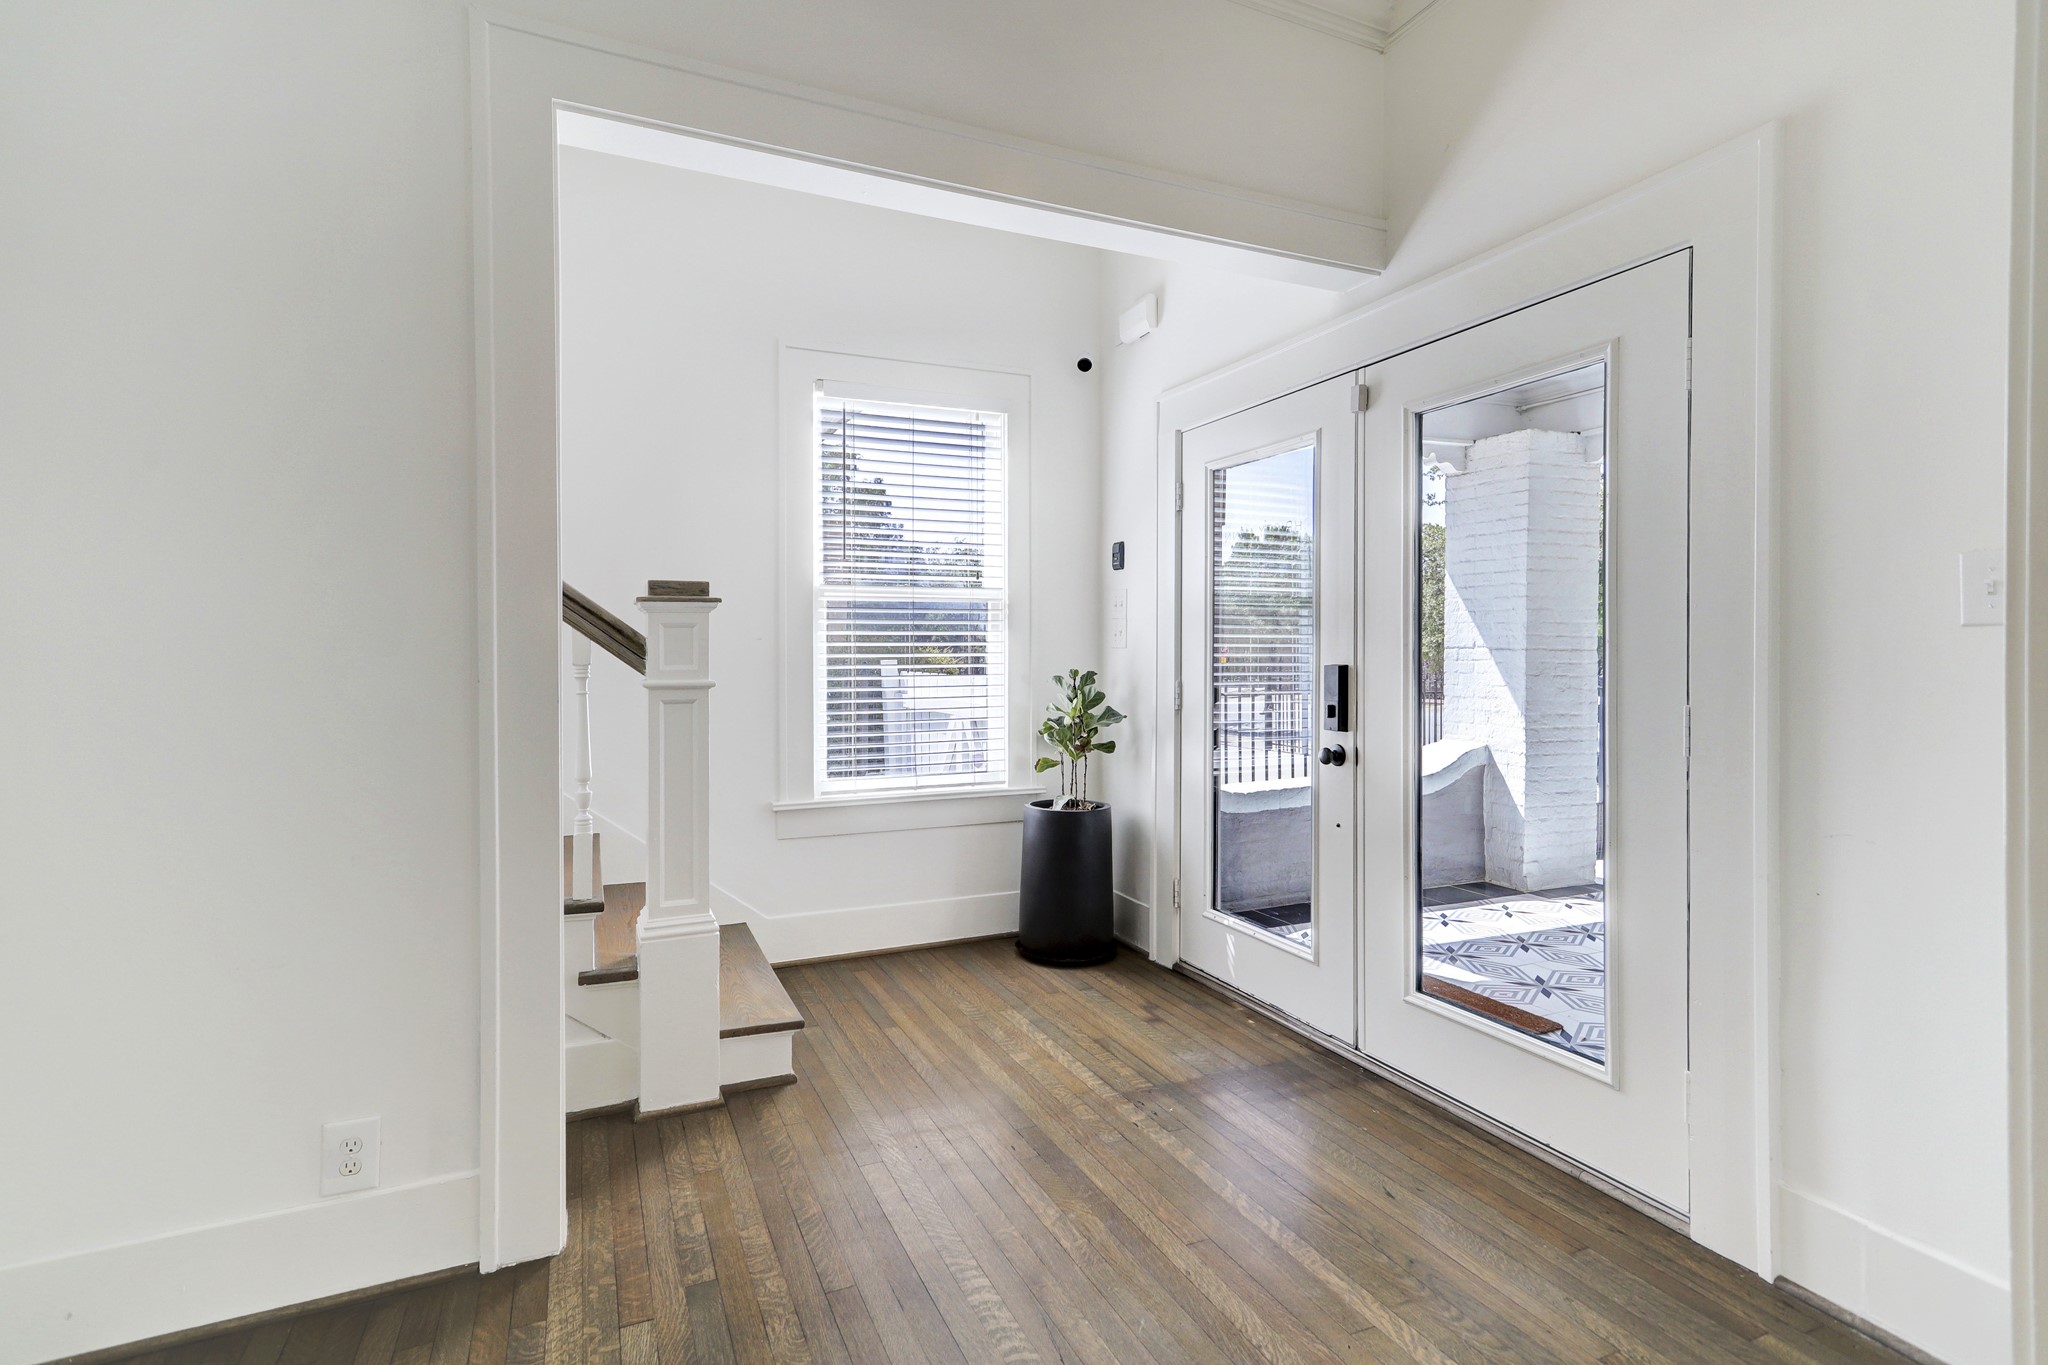 WOW YOUR FAMILY, FRIENDS OR CUSTOMERS WHEN THEY VISIT THIS ELEGANT ENTRYWAY; EQUIPPED WITH WOOD FLOORS, CROWN MOLDING AND MODERN NEUTRAL COLORS!